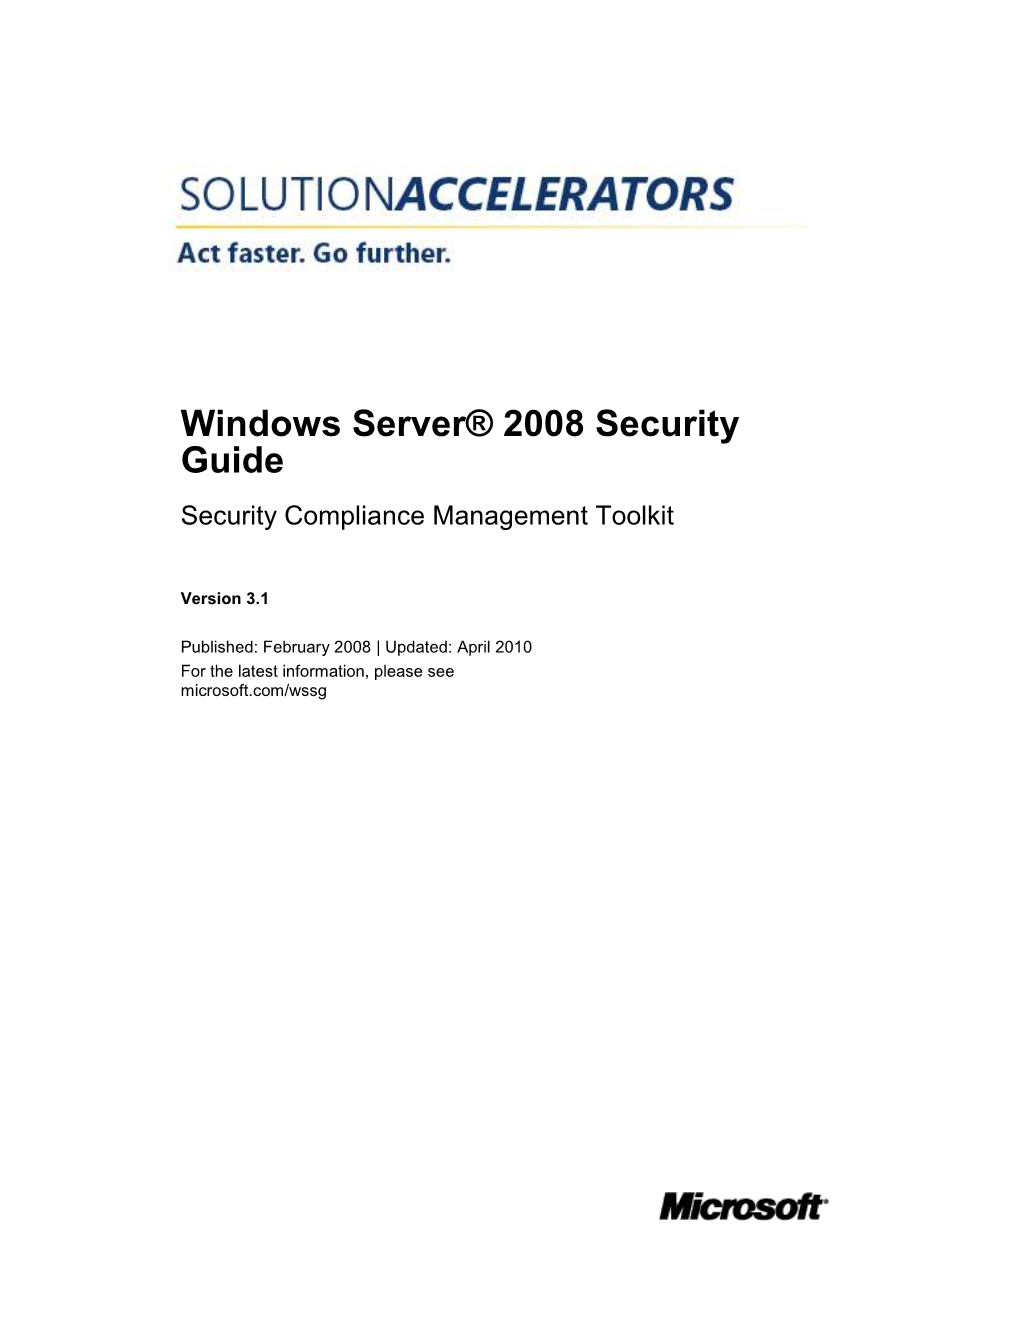 Windows Server® 2008 Security Guide Security Compliance Management Toolkit